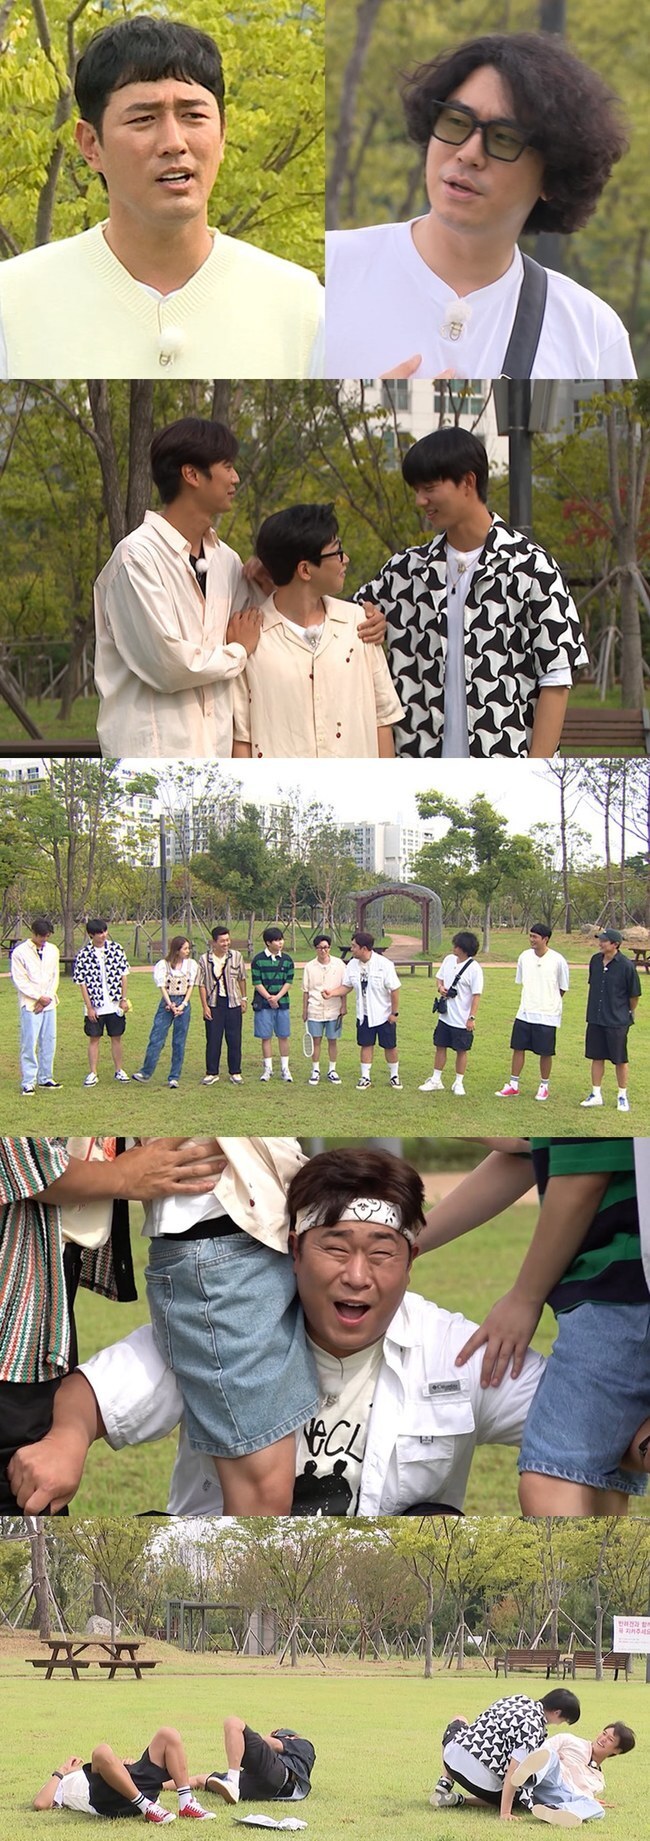 2 Days & 1 Night will be played.KBS 2TV Season 4 for 1 Night 2 Days (hereinafter referred to as 1 night and 2 days) broadcast on September 4 will show a spectacular performance of members and best friends to avoid getting it.On the same day, Jo Han-sun shows his excitement by foreshadowing the rich food that is the privilege of 2 Days & 1 Night.Jo Han-sun, who had been contacted by Yeon Jung-hoon on his trip to Jeju Island and was forced to obtain the beach without any hesitation, said, Do you want to get it today?Jo Han-sun, the only guest to get it, gradually frets over Summertime, which does not go its way.On the other hand, positive man Lee Si-eon is not worried, but from the beginning of shooting, he says, I just have to enjoy it.Also, Lee Si-eon said, I like to get it. When he expressed his expectation of getting it, his partner Mun Se-yun laughed bitterly.